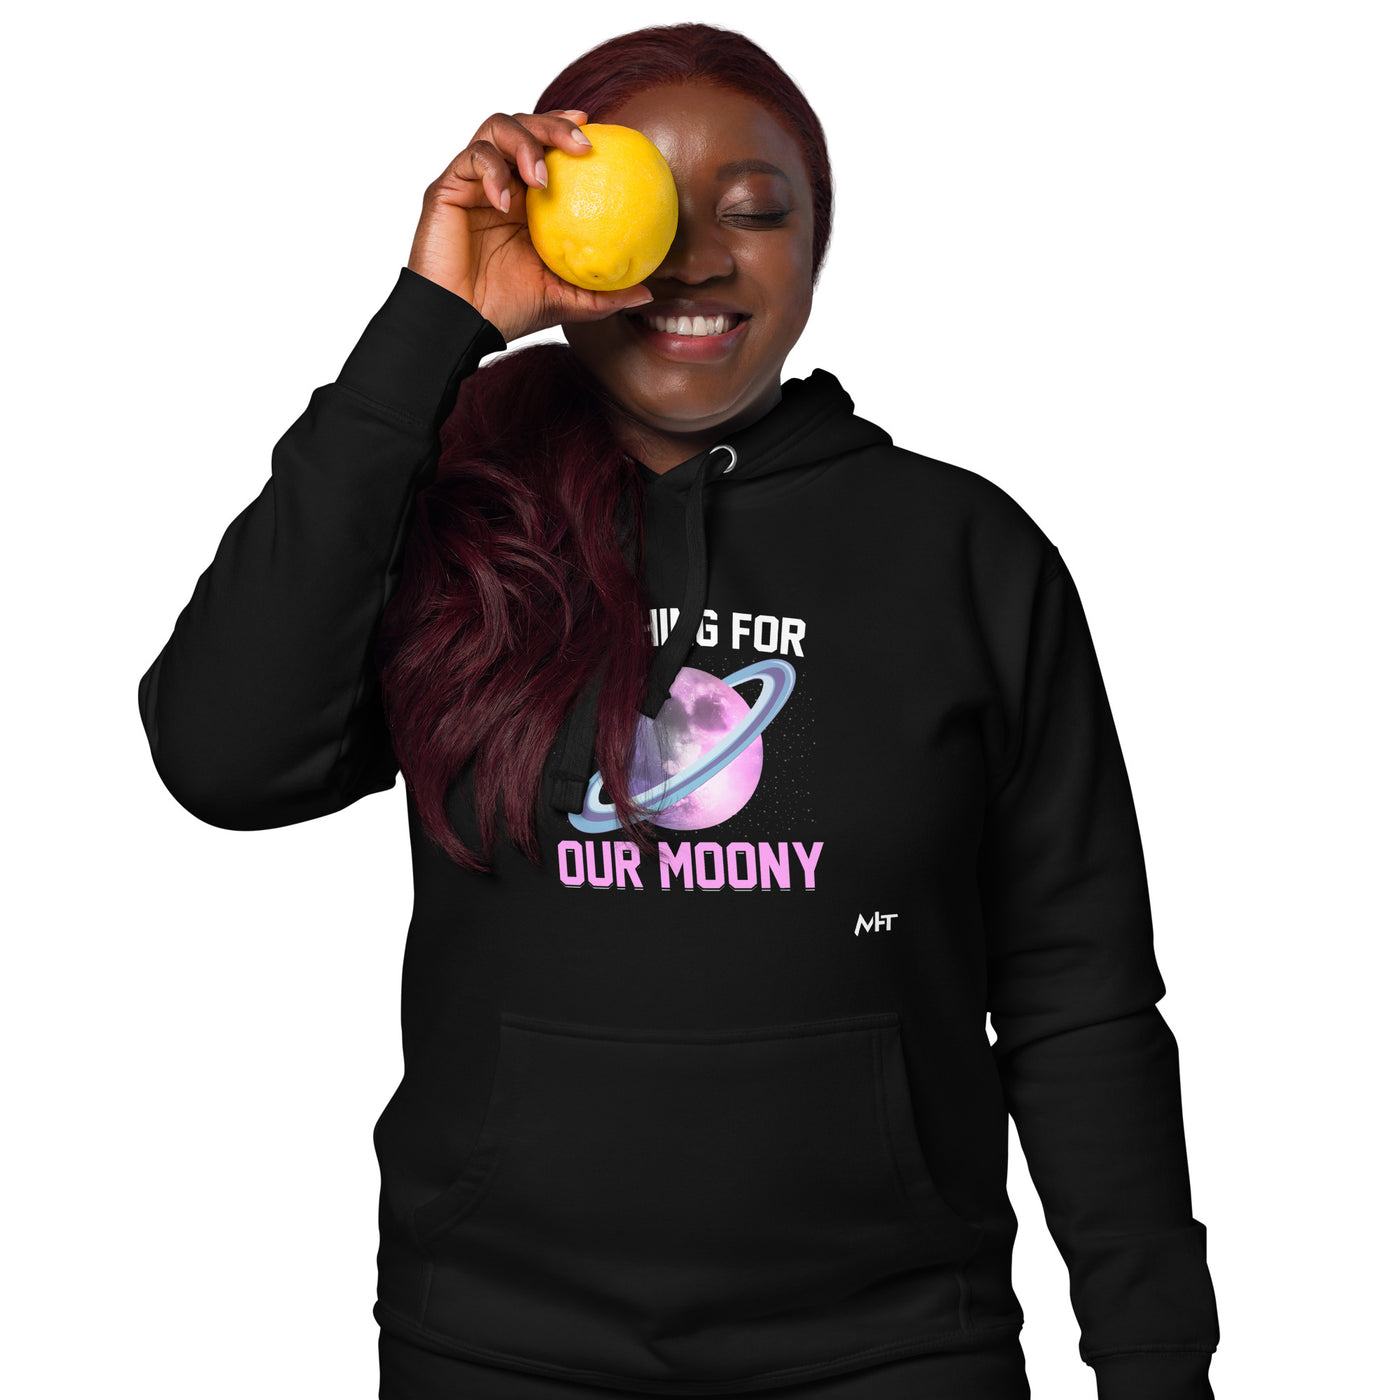 Anything for our moony - Unisex Hoodie